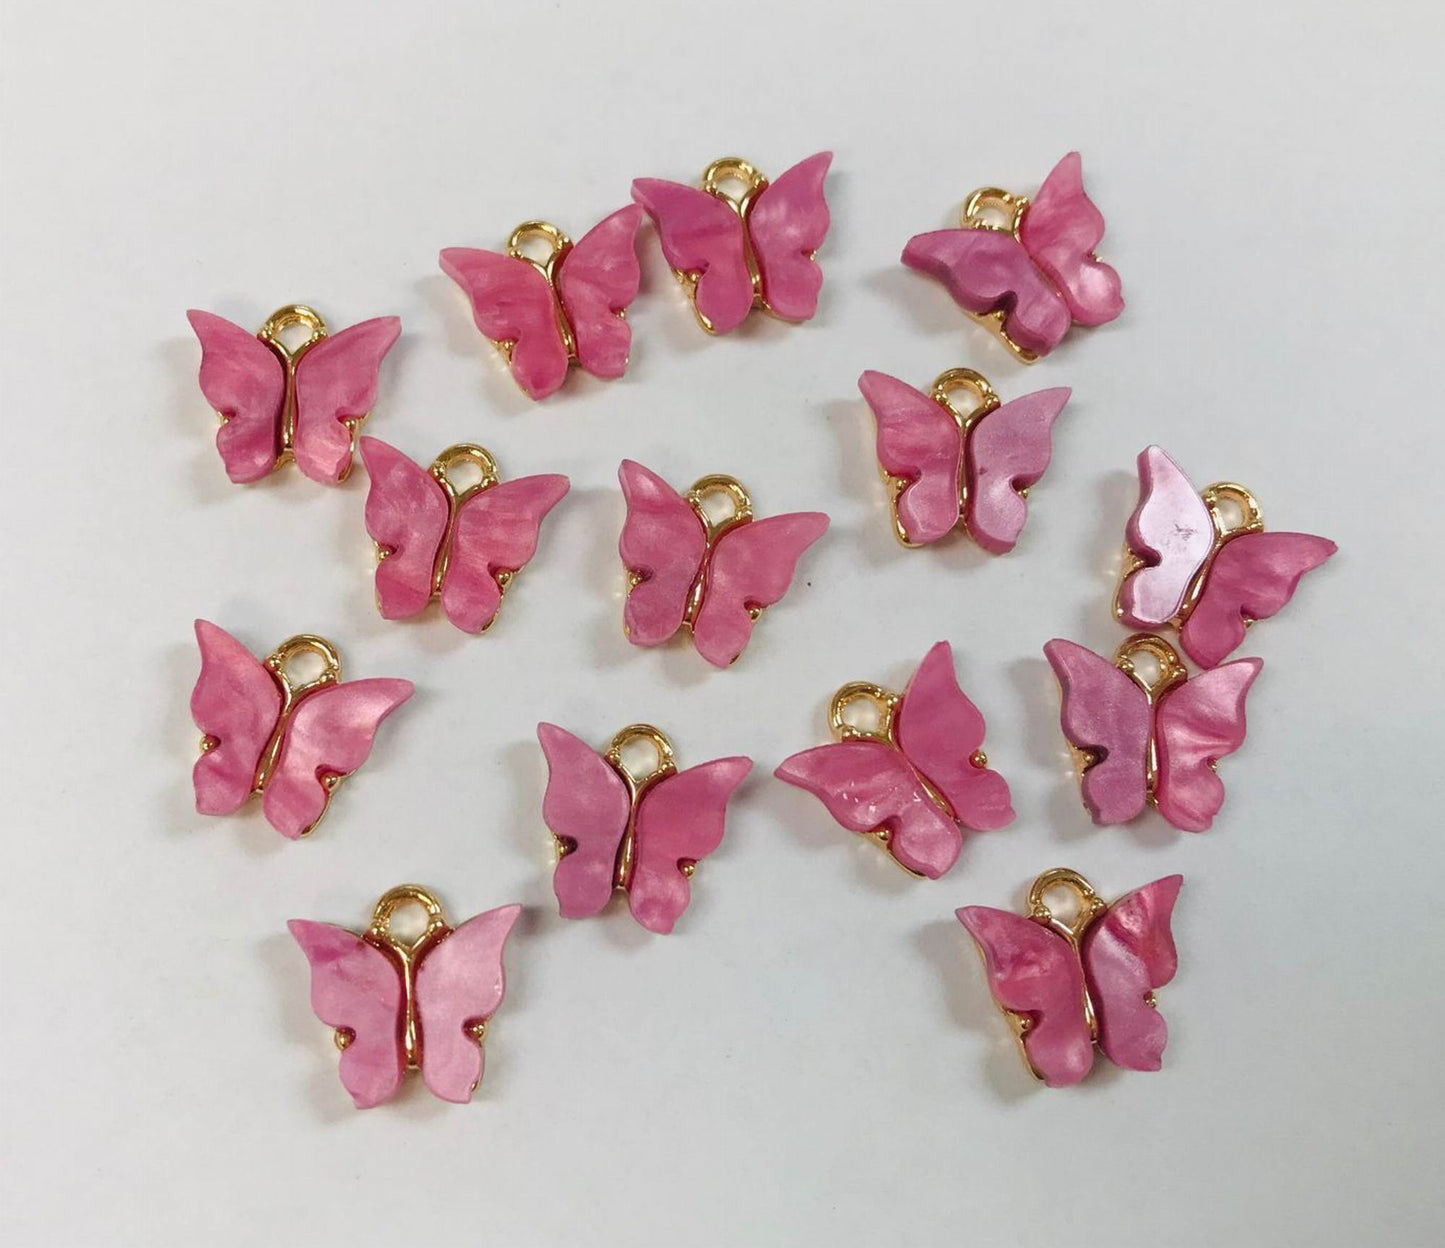 4 Wholesale Acrylic Mariposa Charms, Butterfly Charms, Pearl Butterfly